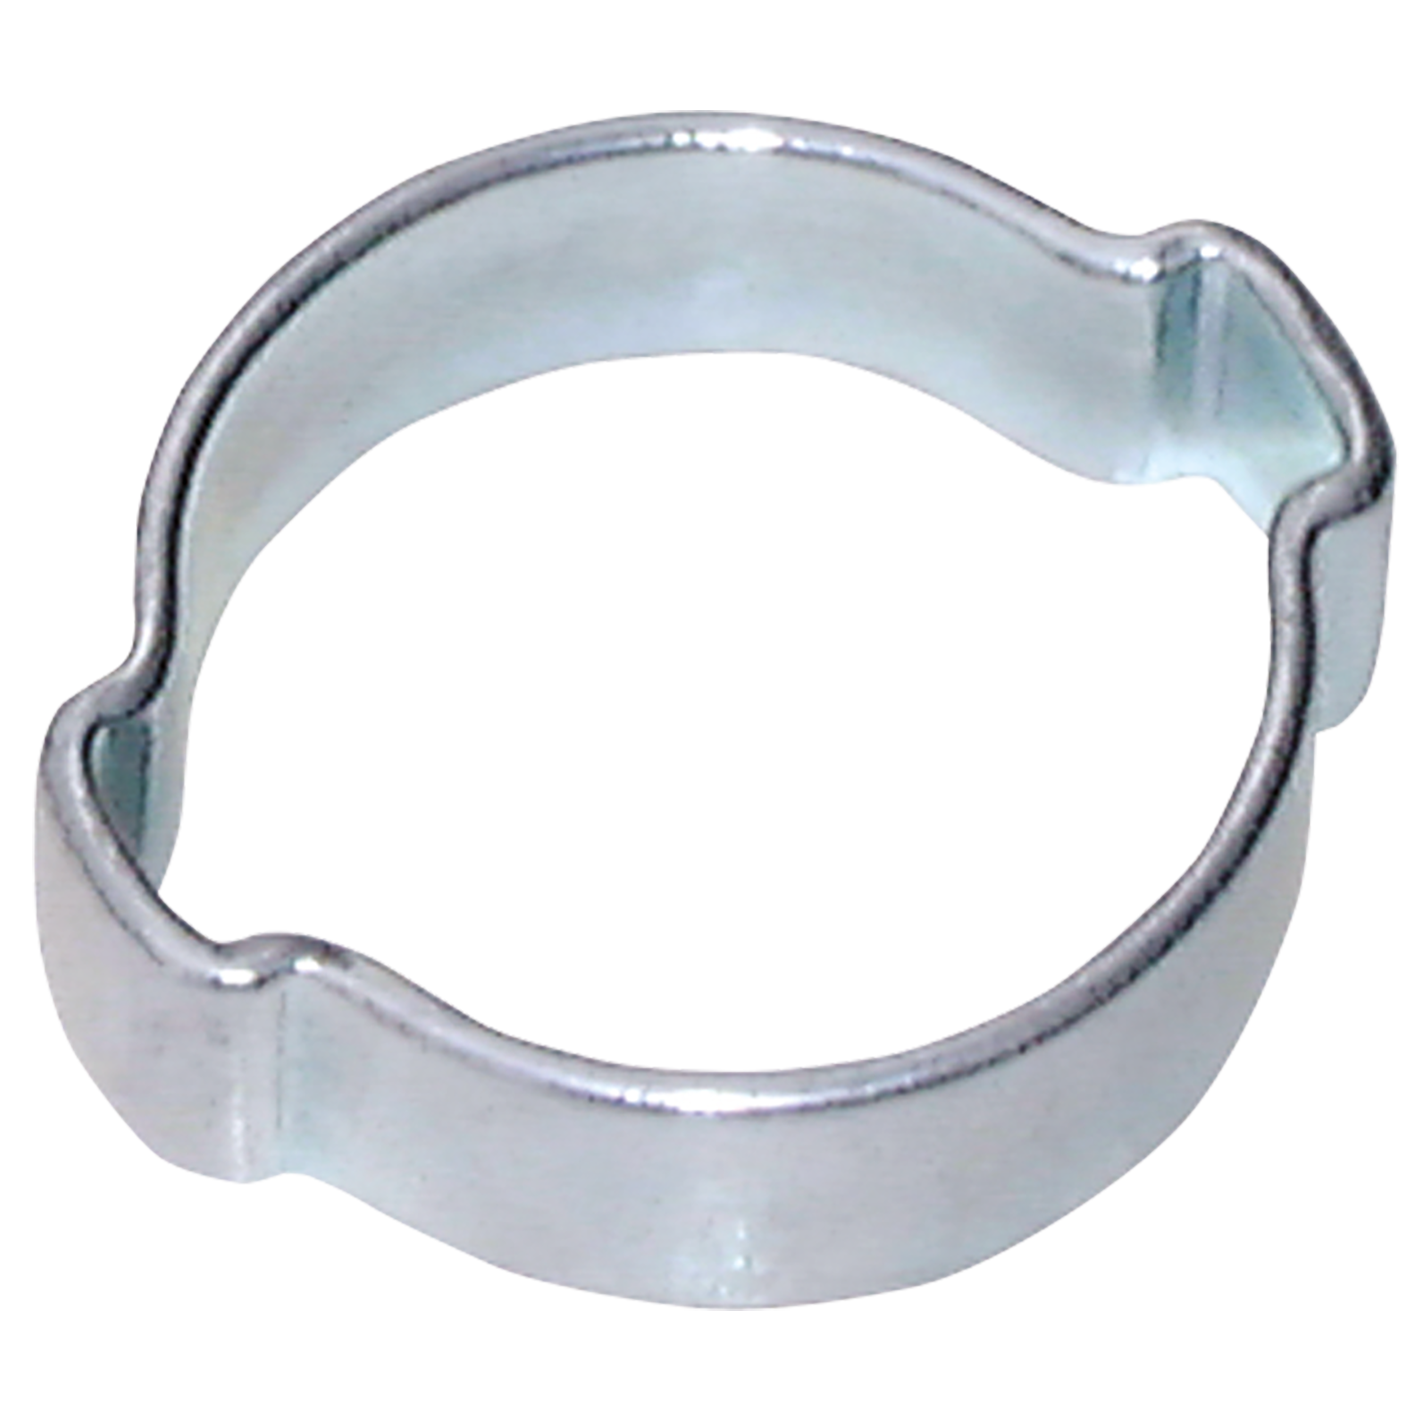 19.0-22.0MM 2-EAR STEEL CLAMP PLATED